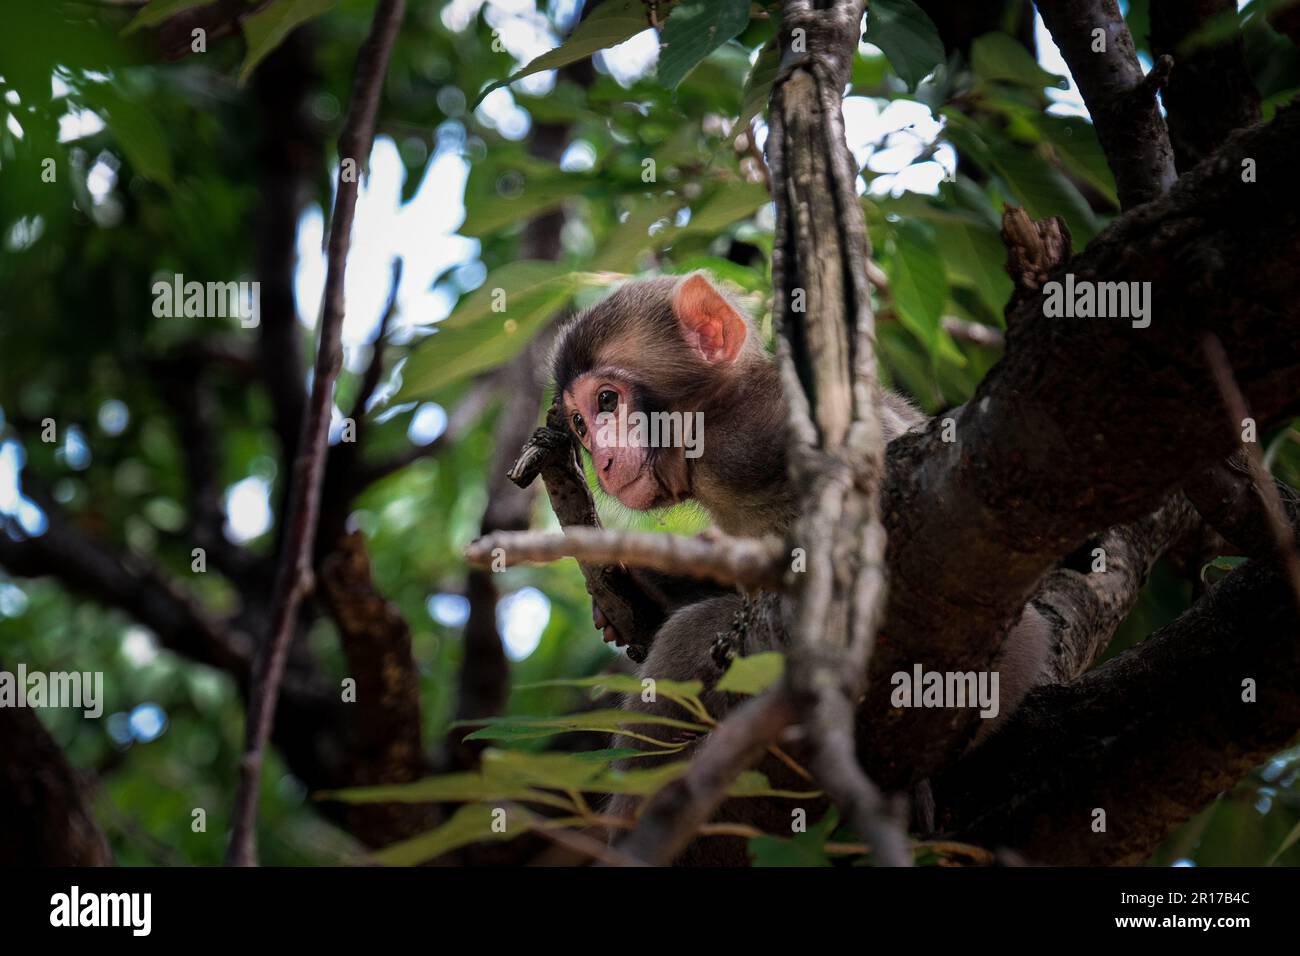 Baby macaque monkey sitting in a tree amongst the leaves and branches. Kyoto, Japan Stock Photo